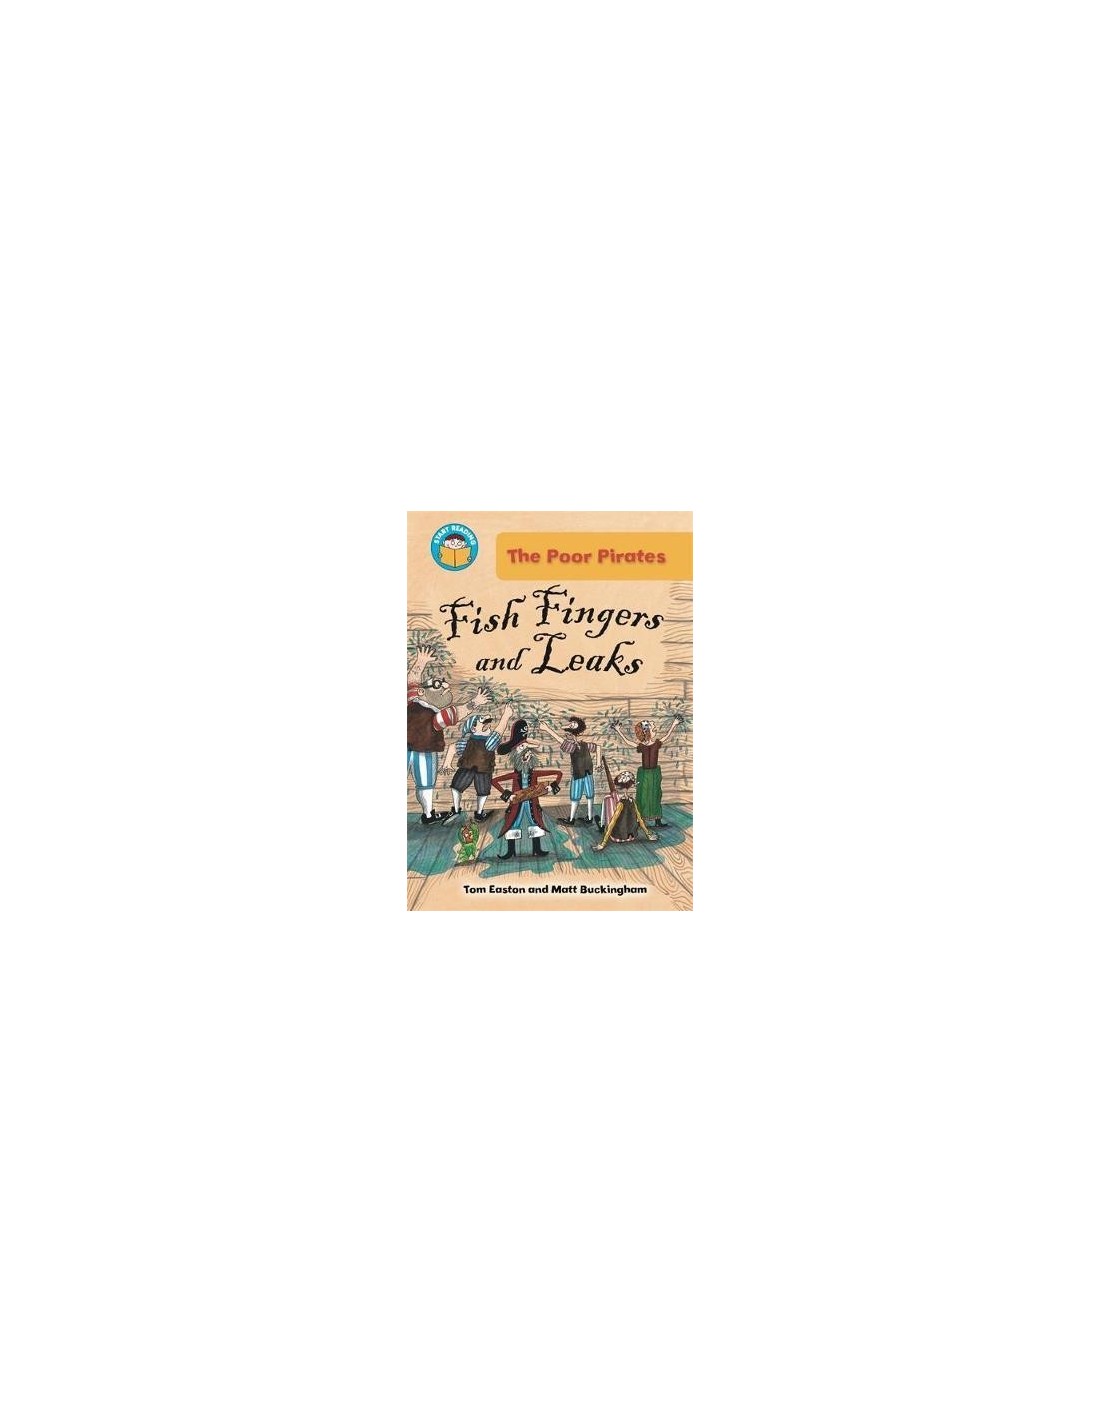 Start Reading: The Poor Pirates: Fish Fingers and Leaks